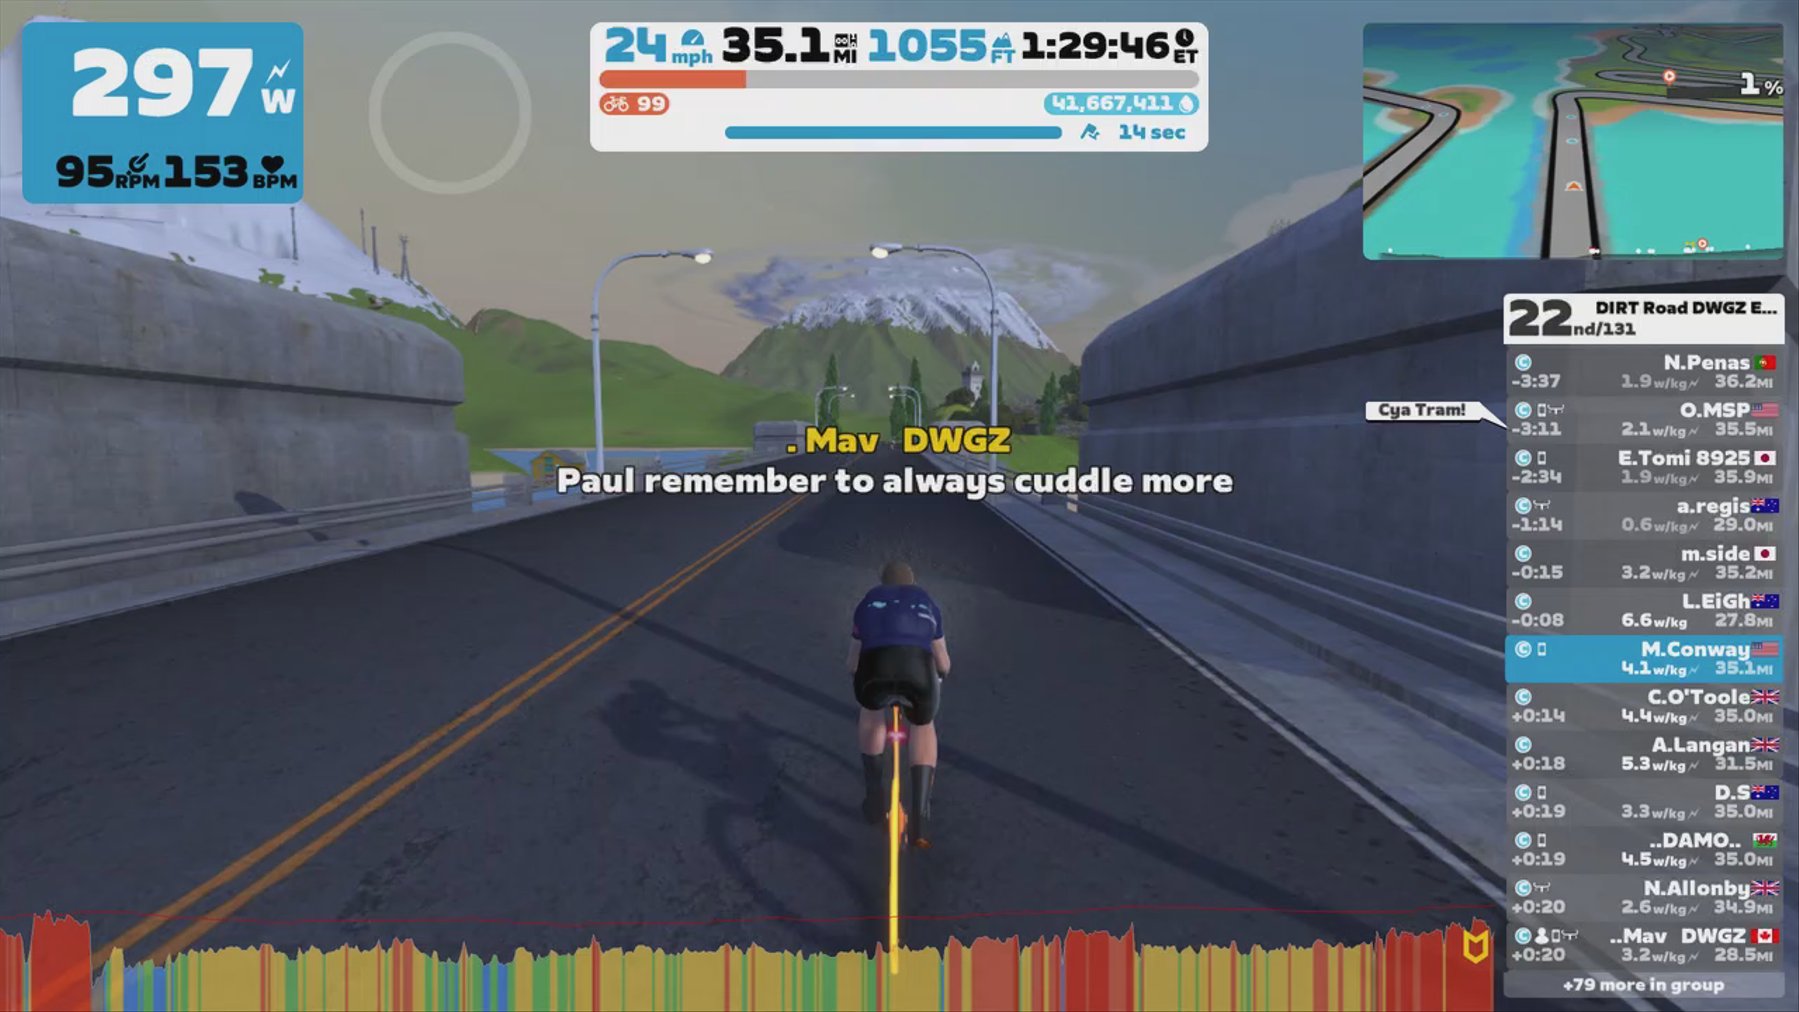 Zwift - Group Ride: DIRT Road DWGZ Endurance - Who let the DAWGZ out?  (C) on Flat Route in Watopia